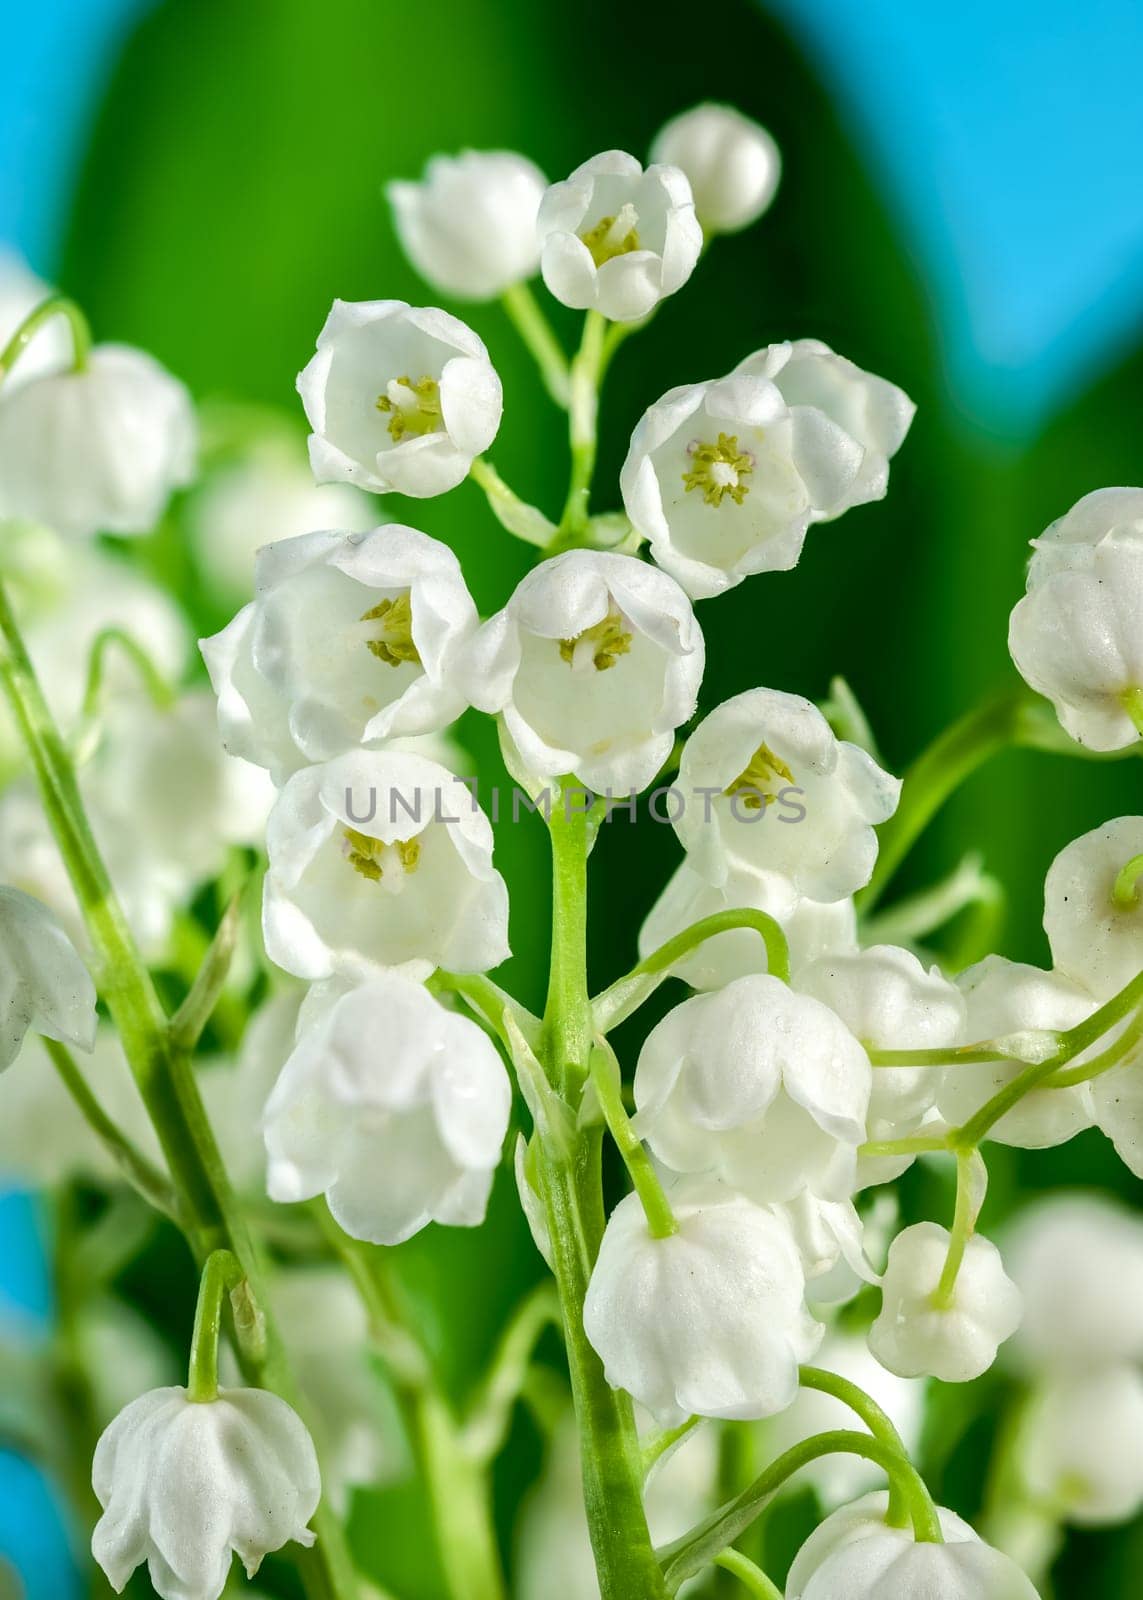 Blooming Lily of the valley flowers on a blue background by Multipedia